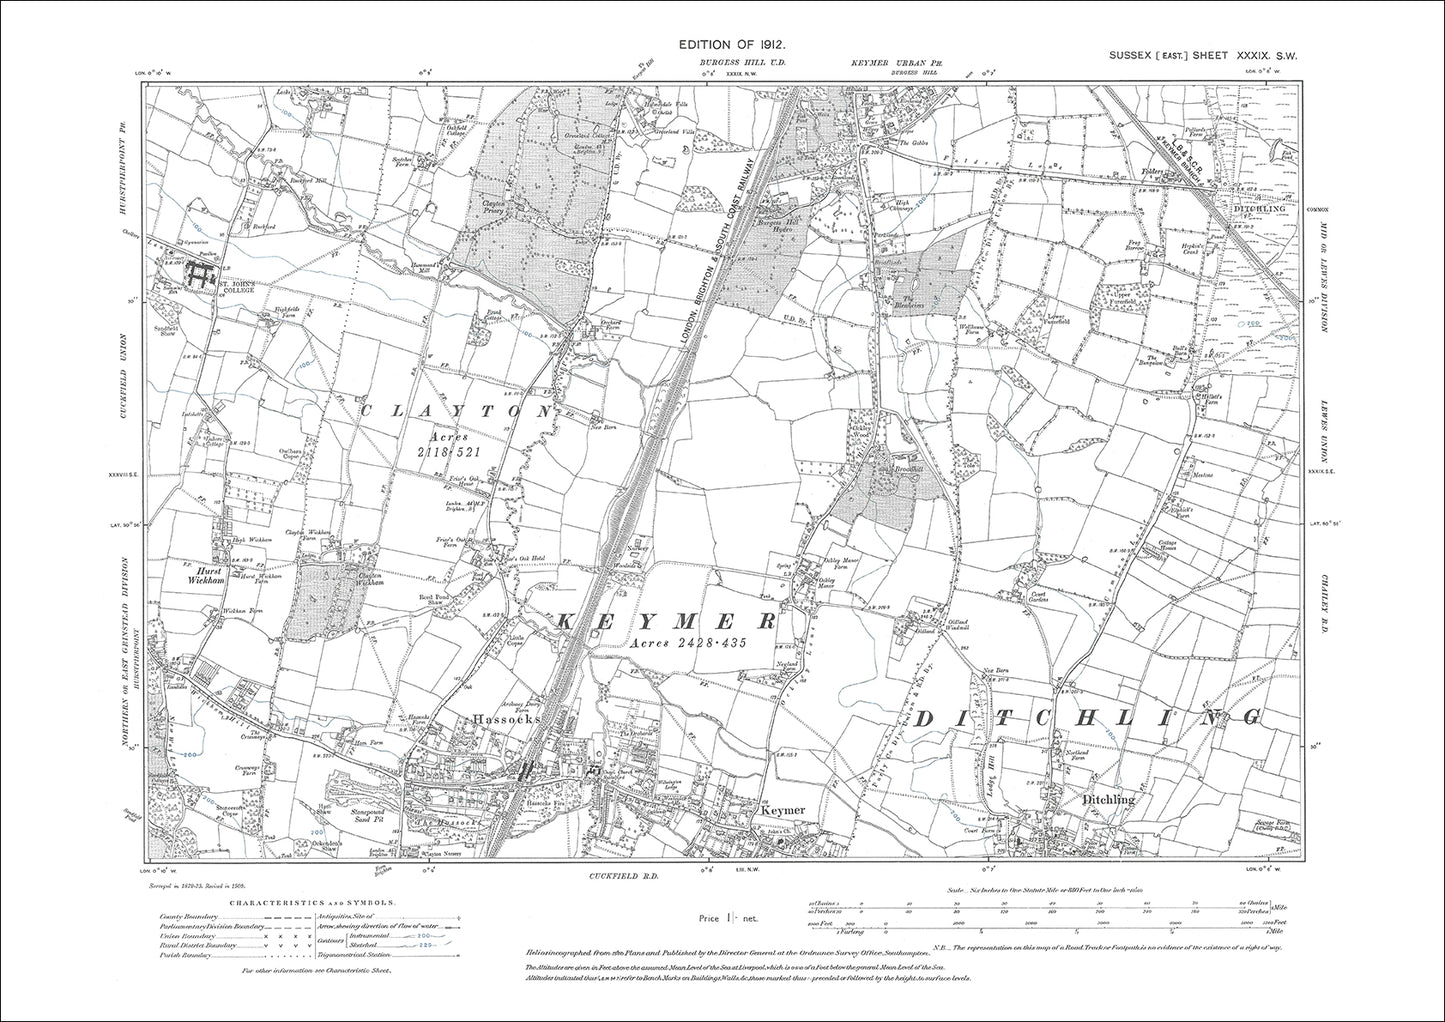 Burgess Hill (south), Hurst Wickham, St Johns College, old map Sussex 1912: 39SW